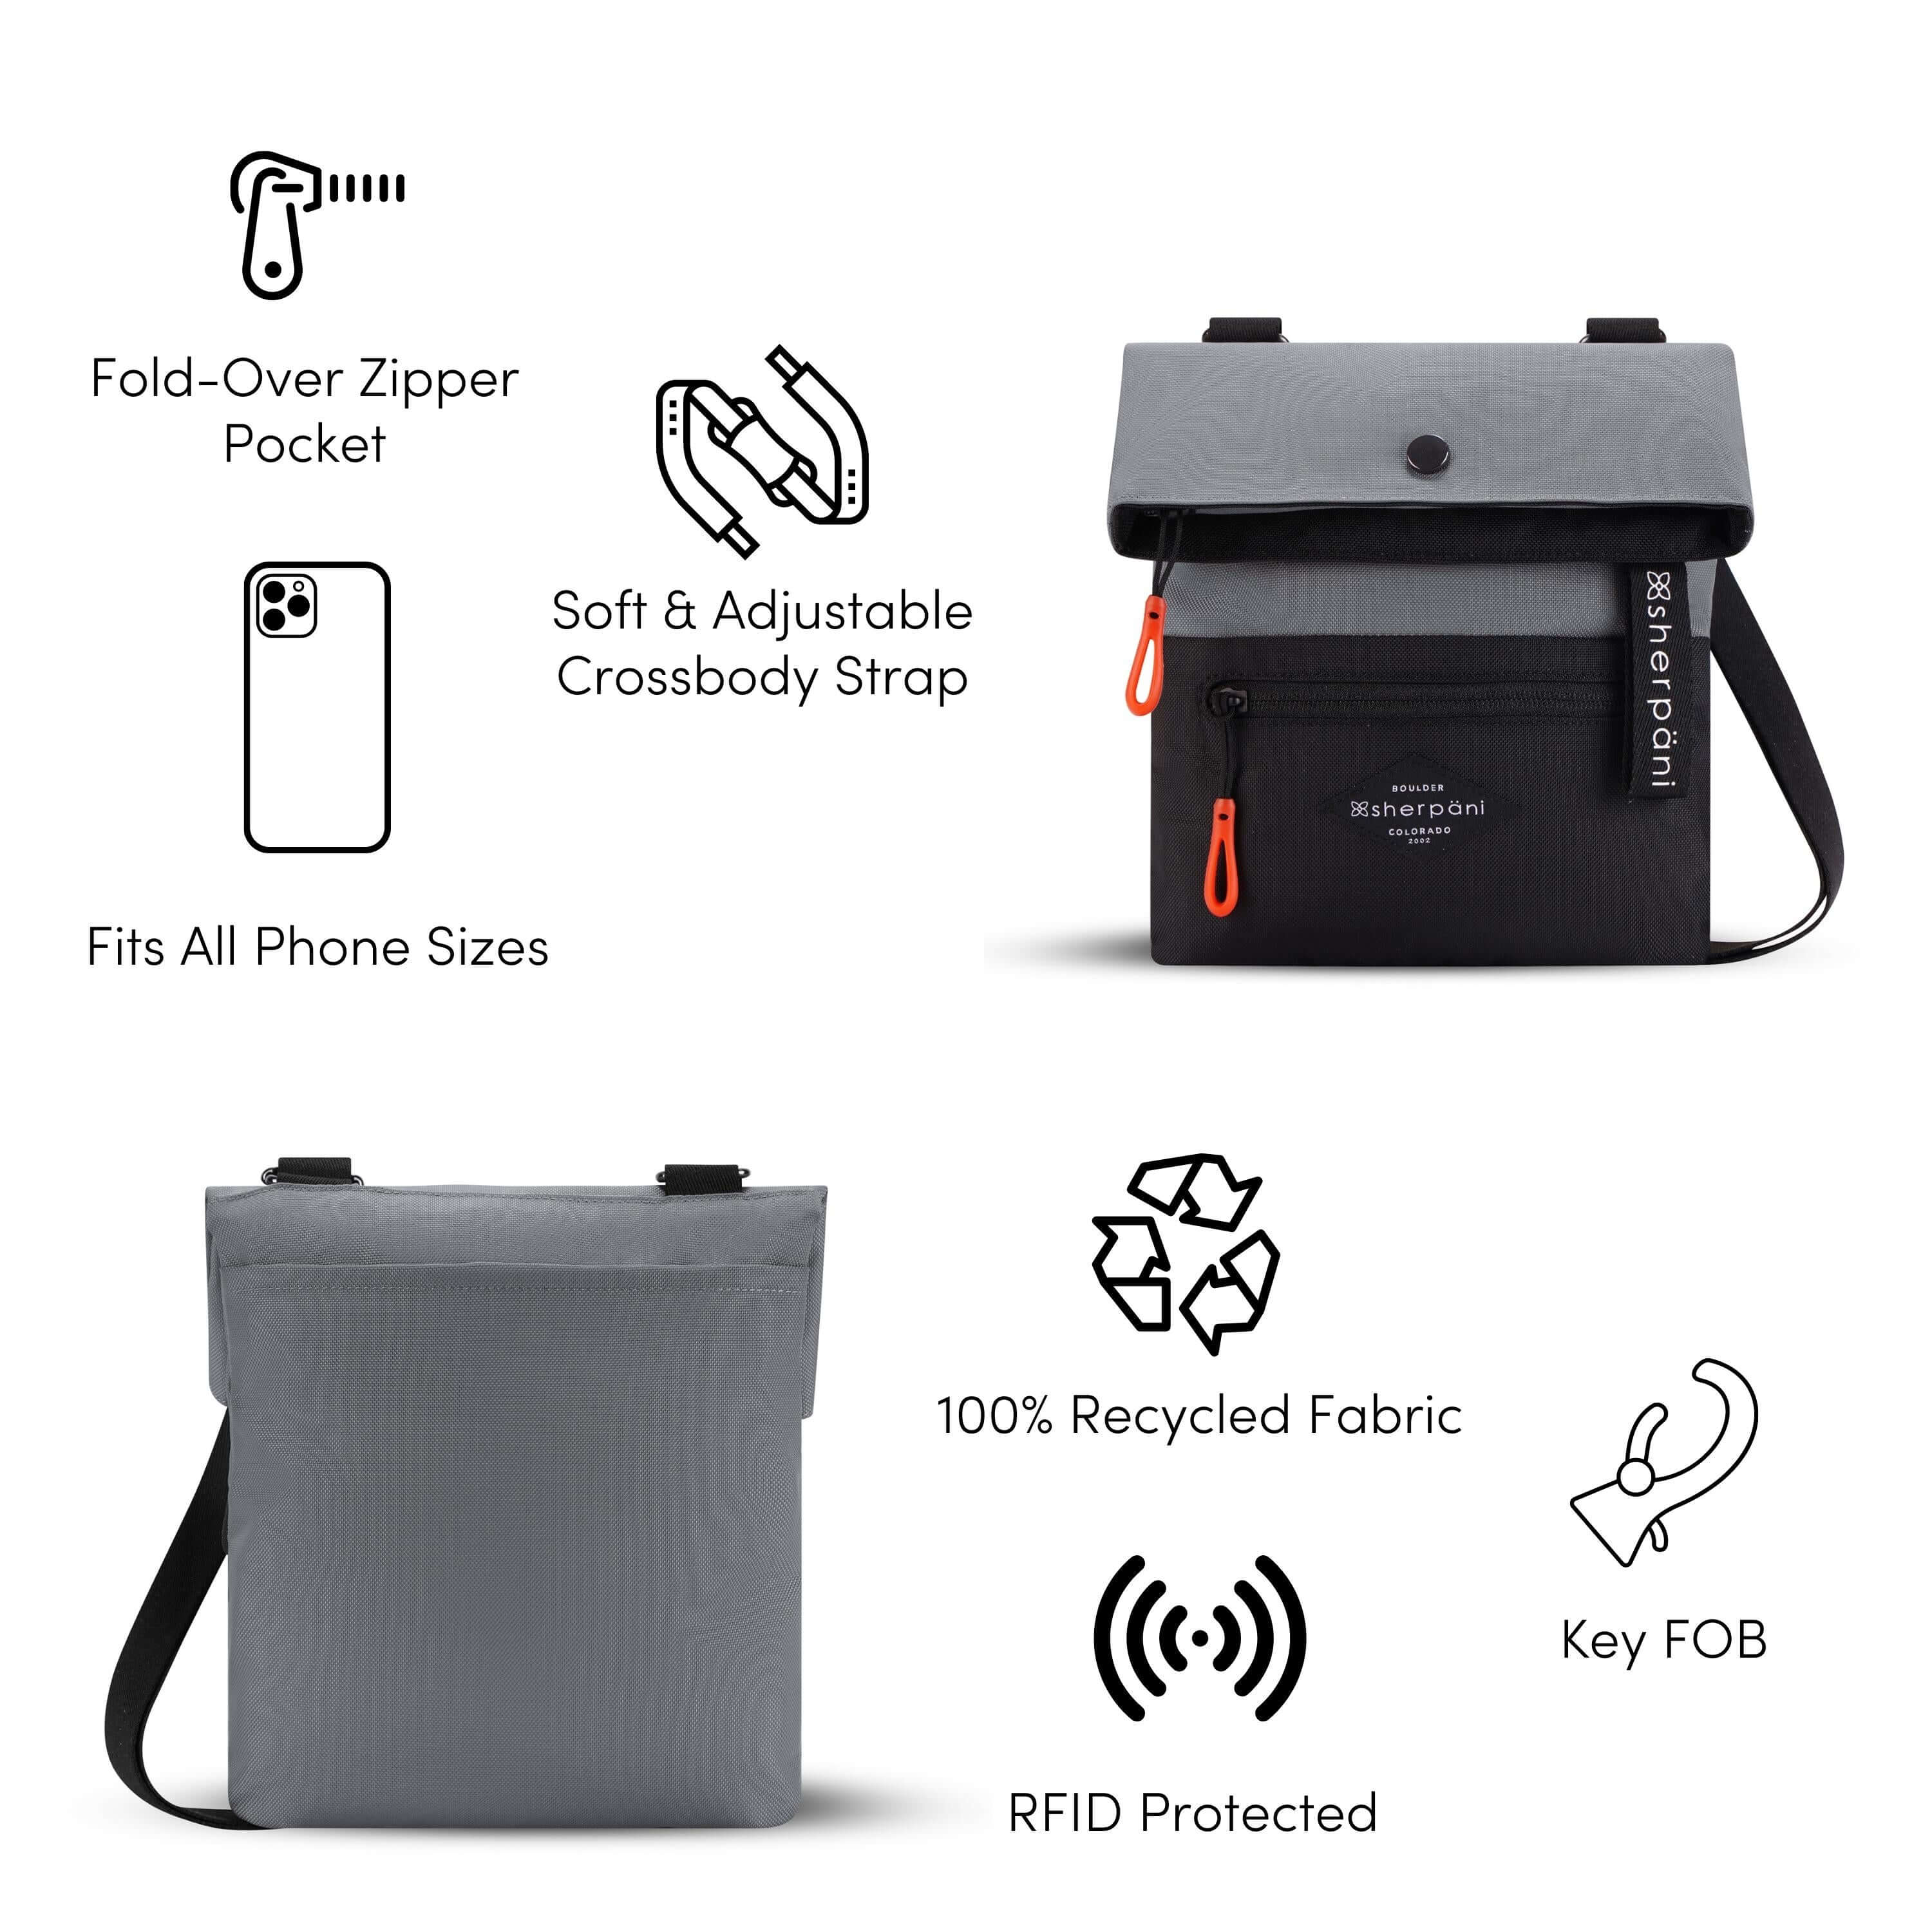 A Graphic showing the features of Sherpani’s crossbody, the Pica. There is a front and back view of the bag. The following features are highlighted with corresponding graphics: Fold-Over Zipper Pocket, Soft & Adjustable Crossbody Strap, Fits All Phone Sizes, 100% Recycled Fabric, RFID Protected, Key FOB. 